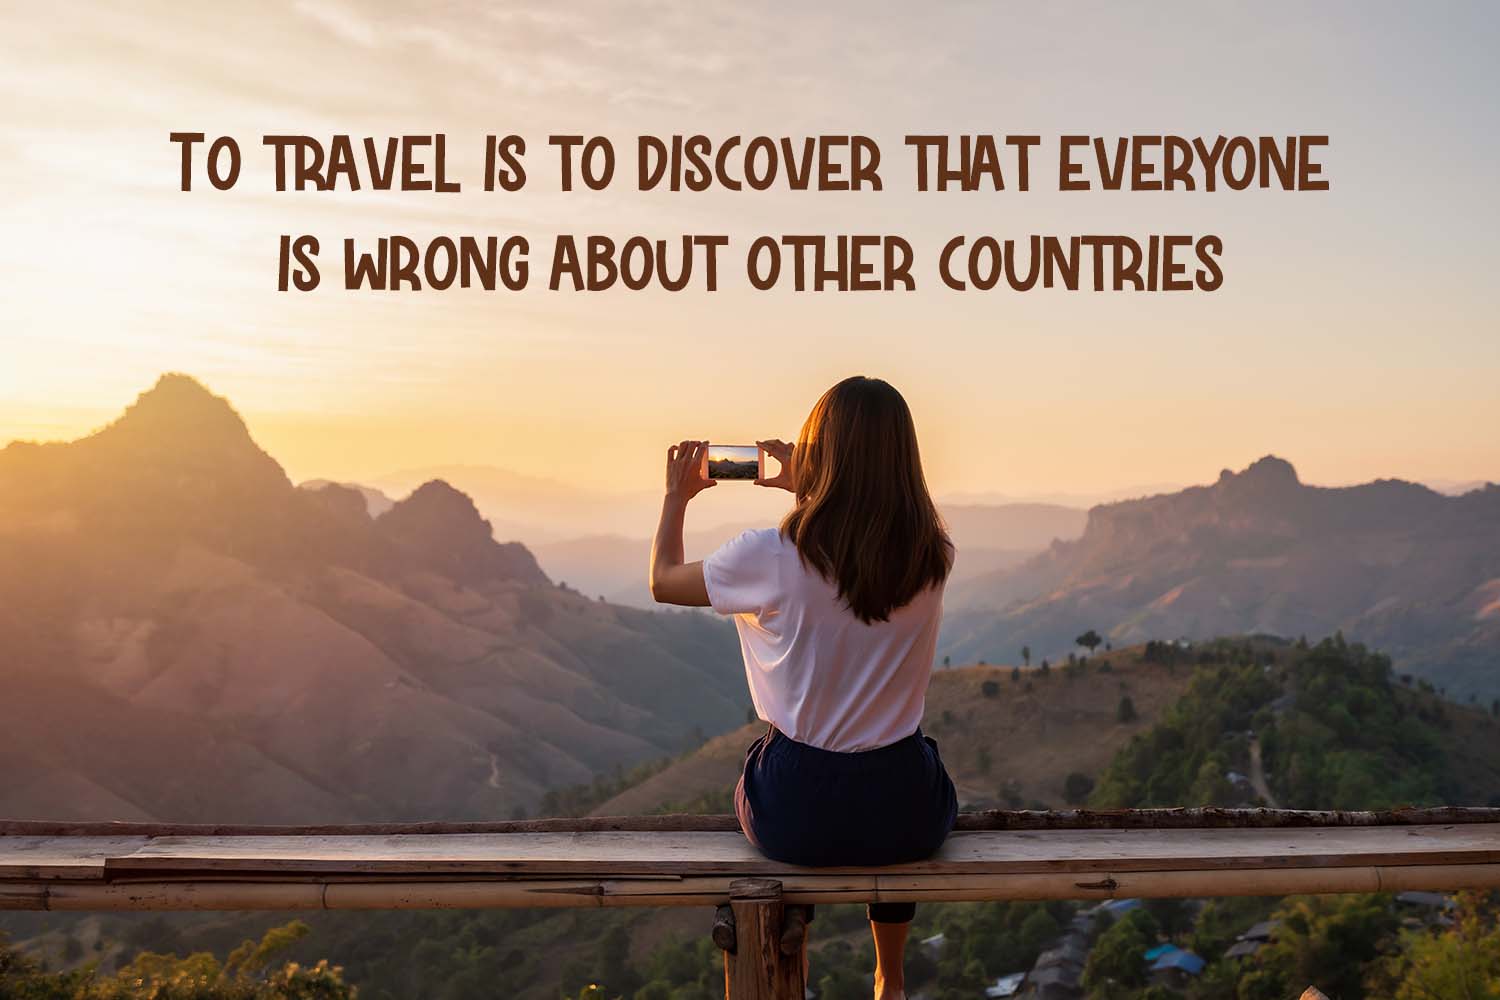 "To travel is to discover that everyone is wrong about other countries." by Aldous Huxley